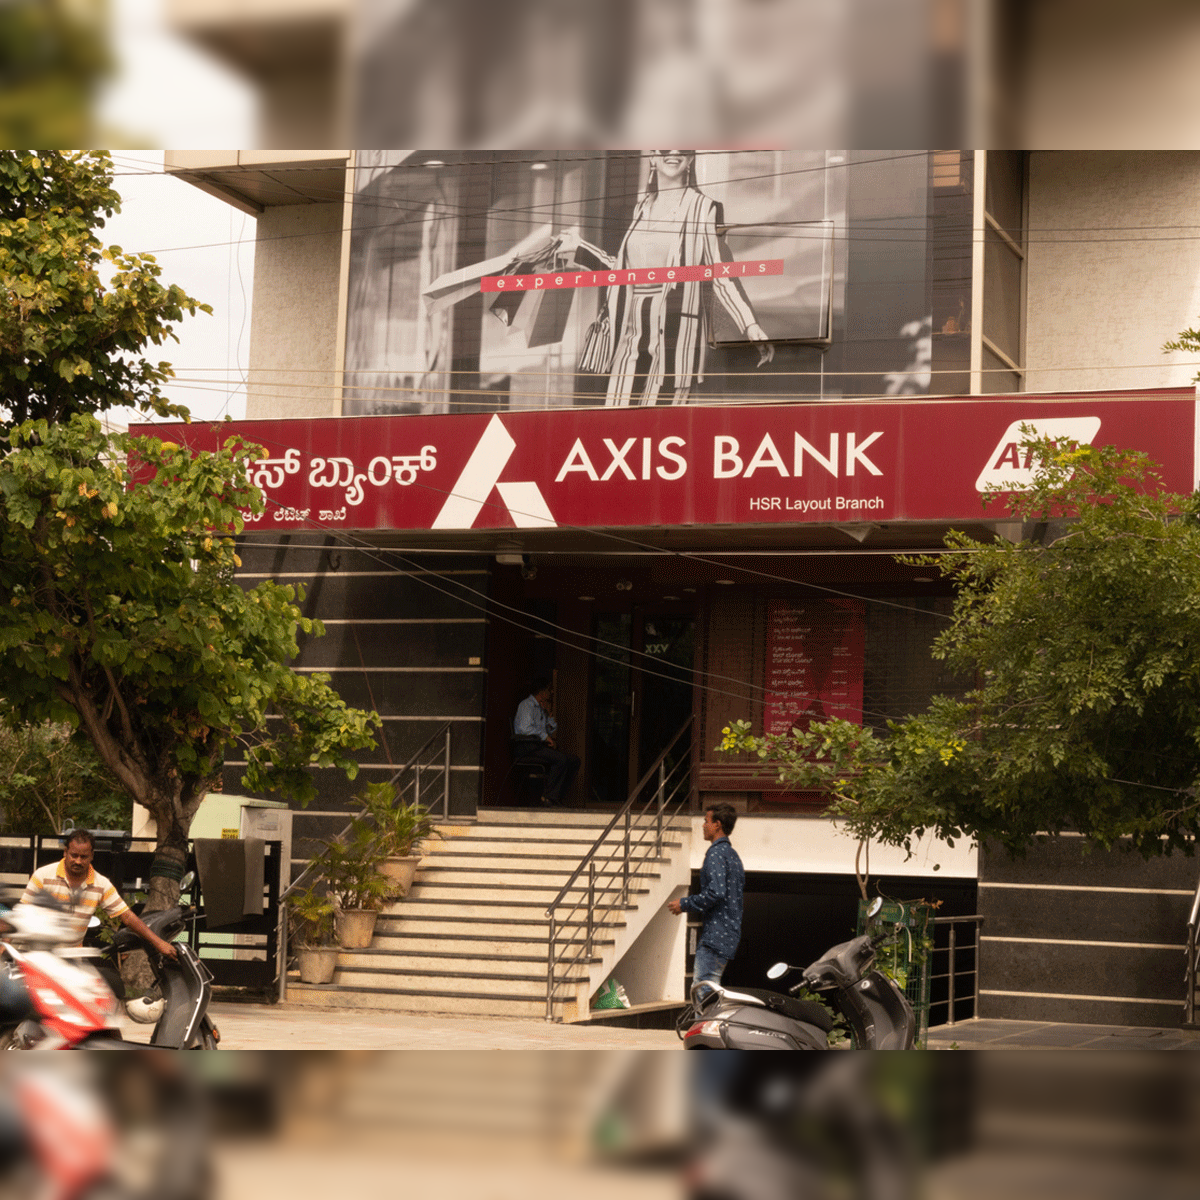 Credit card rule change: Axis Bank cuts cashback, rewards on